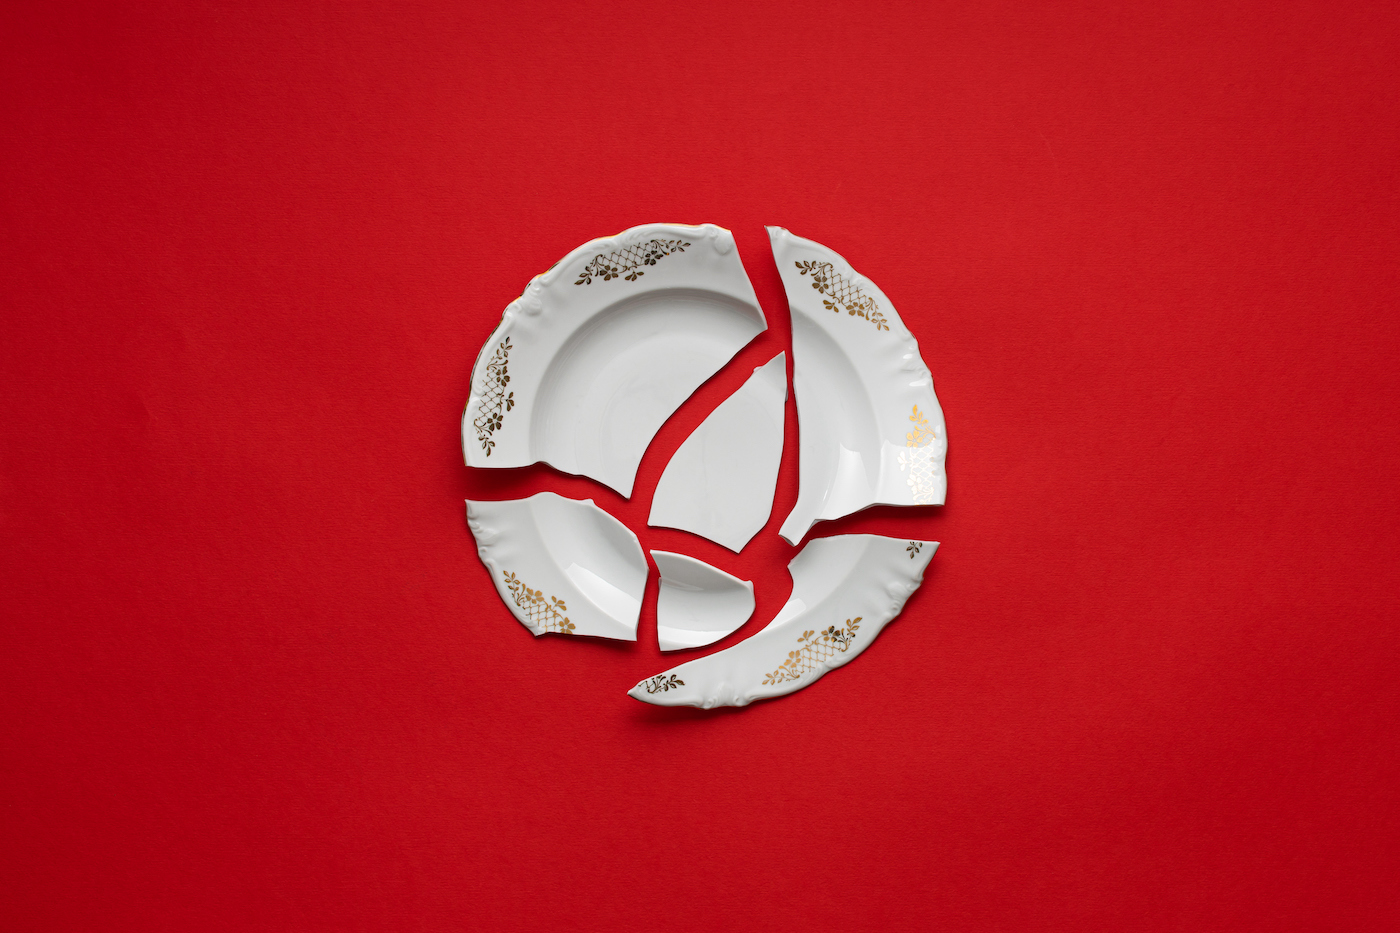 Broken white plate on red background